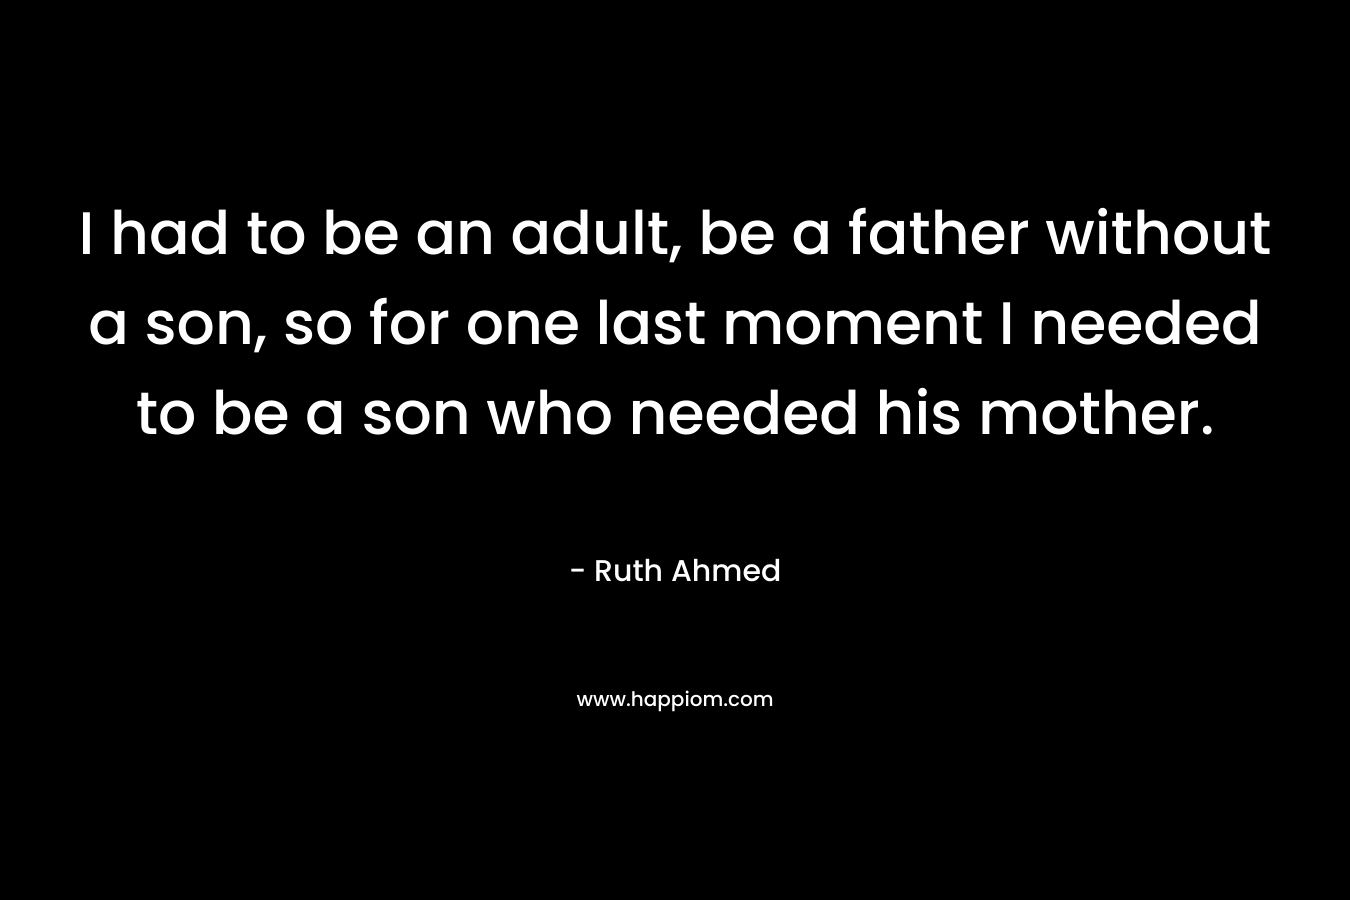 I had to be an adult, be a father without a son, so for one last moment I needed to be a son who needed his mother.